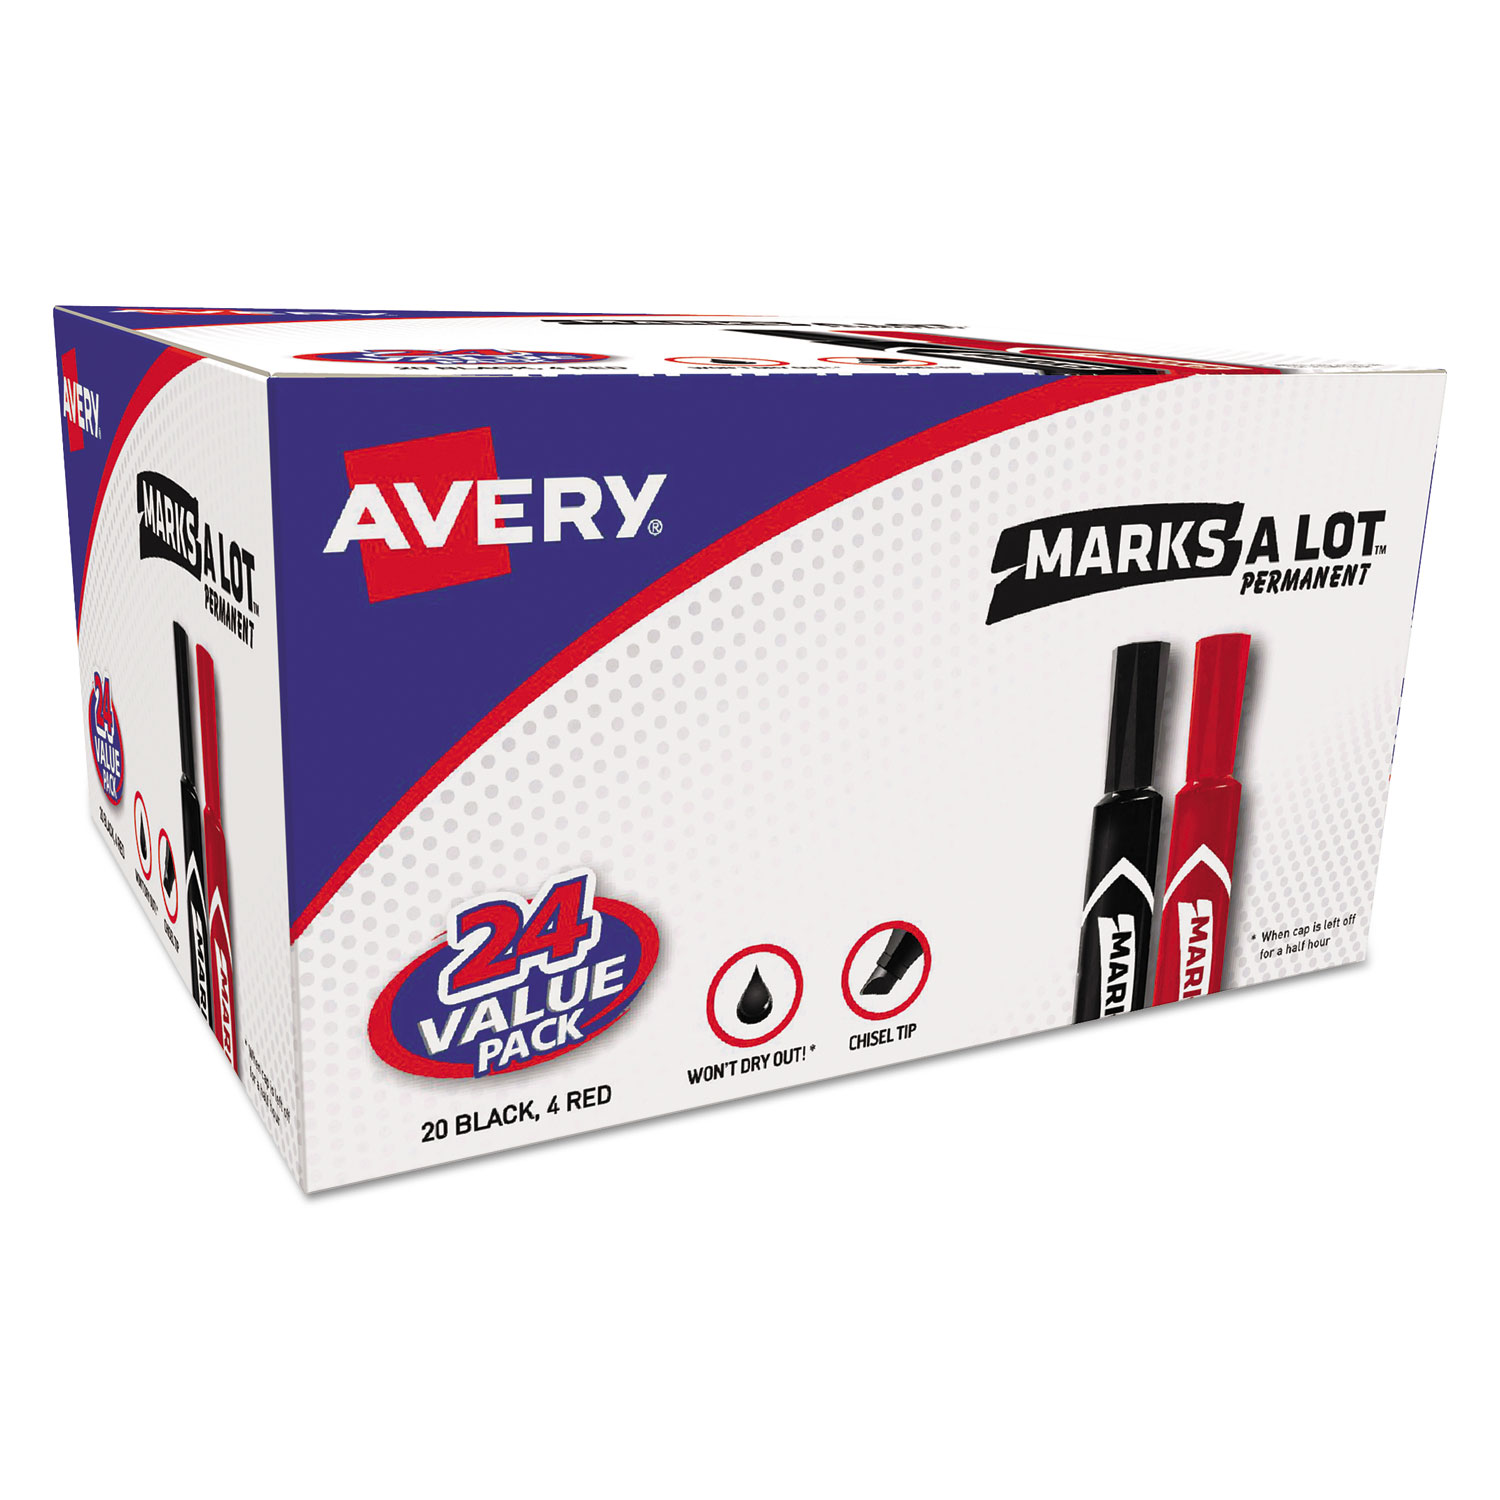  Avery 98187 MARKS A LOT Regular Desk-Style Permanent Marker Value Pack, Broad Chisel Tip, Assorted Colors, 24/Pack (AVE98187) 